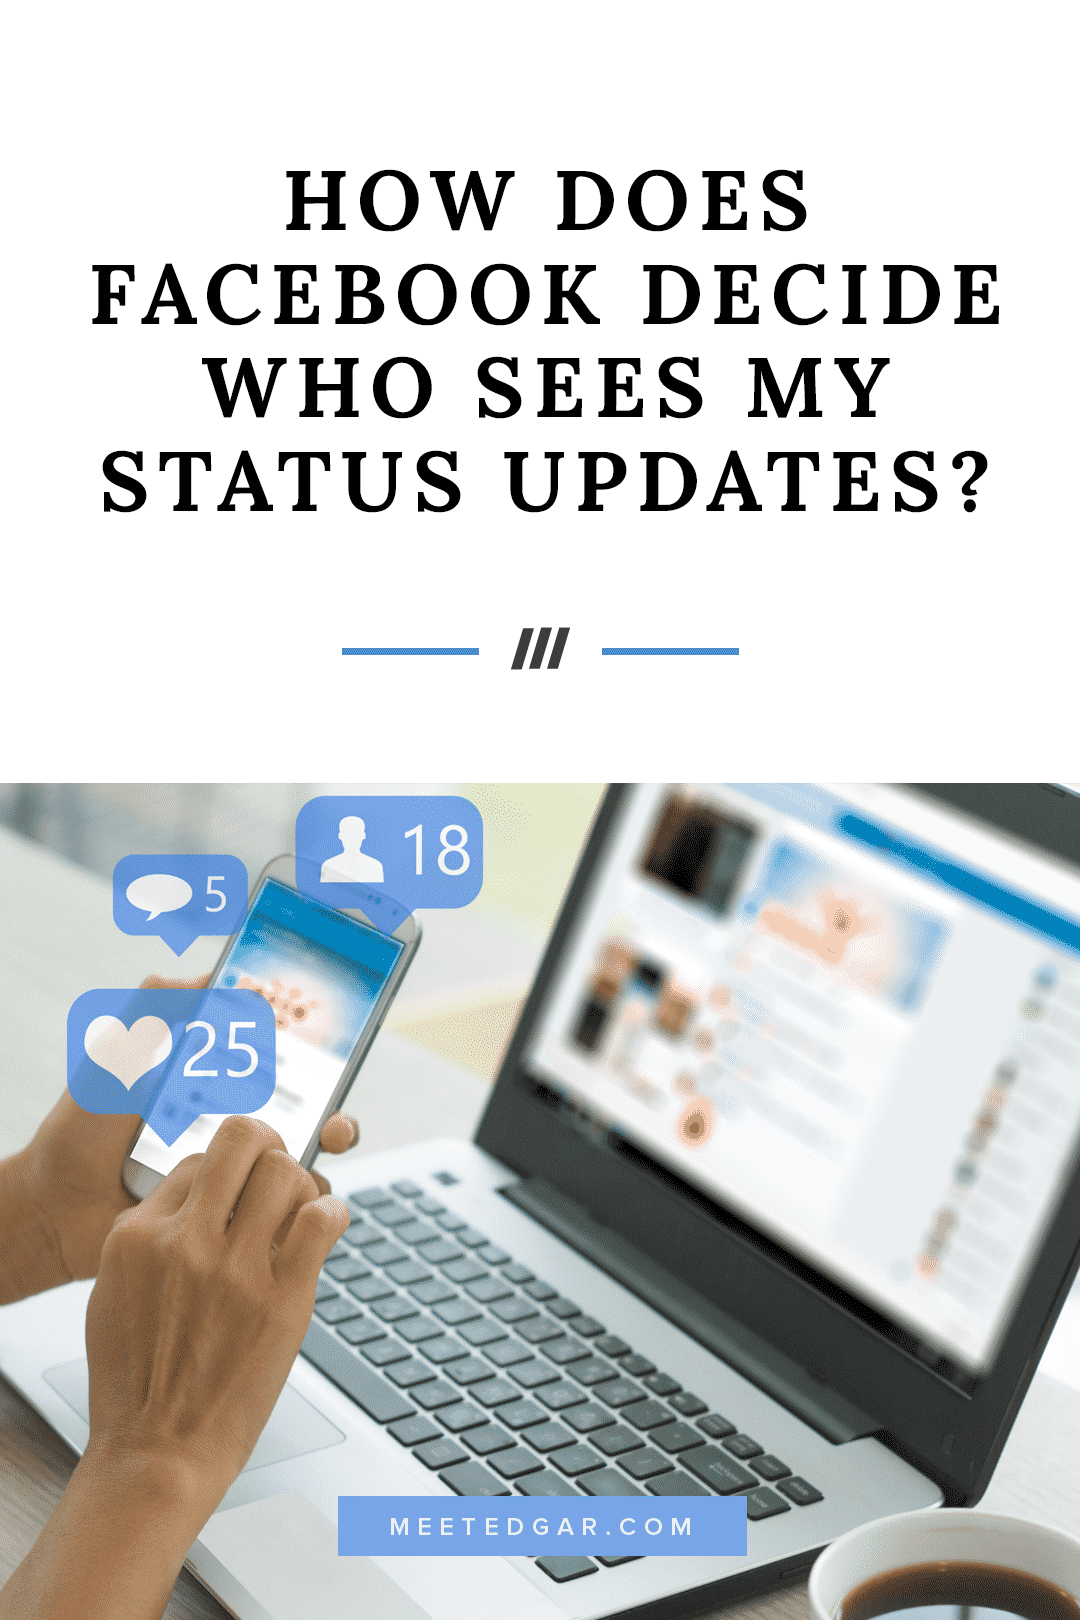 How Facebook Decides Who Sees Your Updates